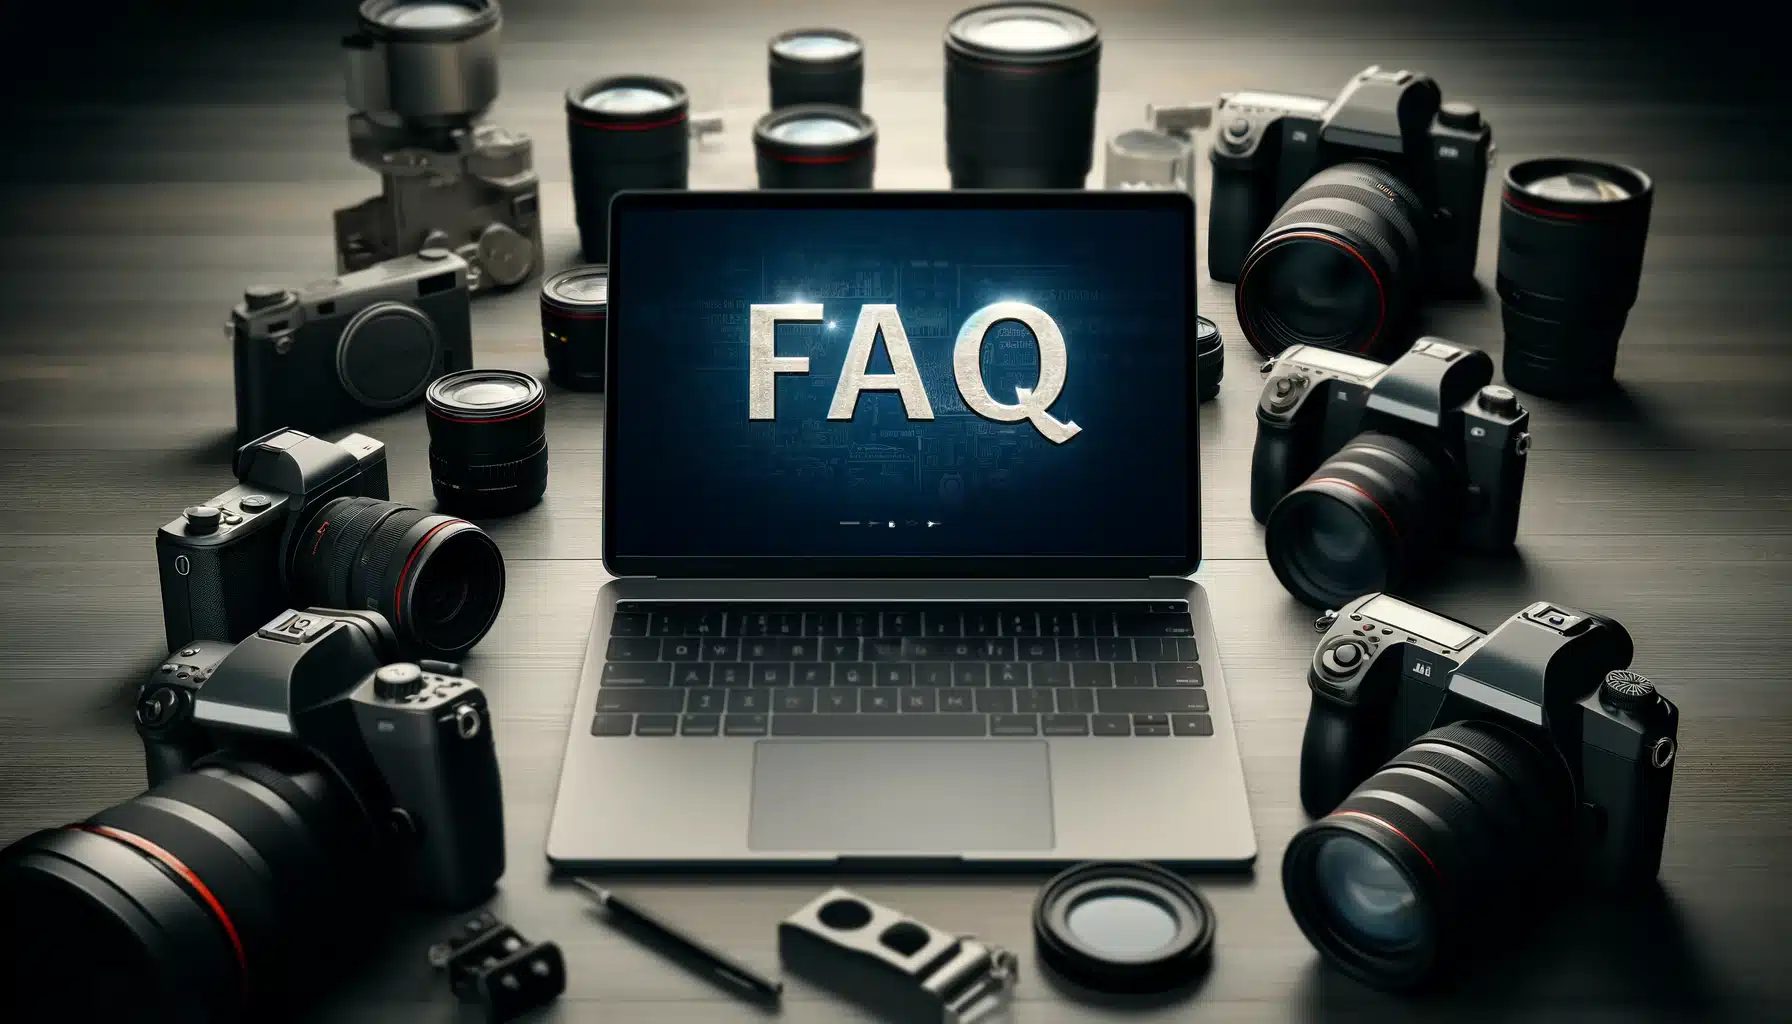 Open laptop on a desk with 'FAQ' on the screen, surrounded by an array of professional cameras and photography equipment.